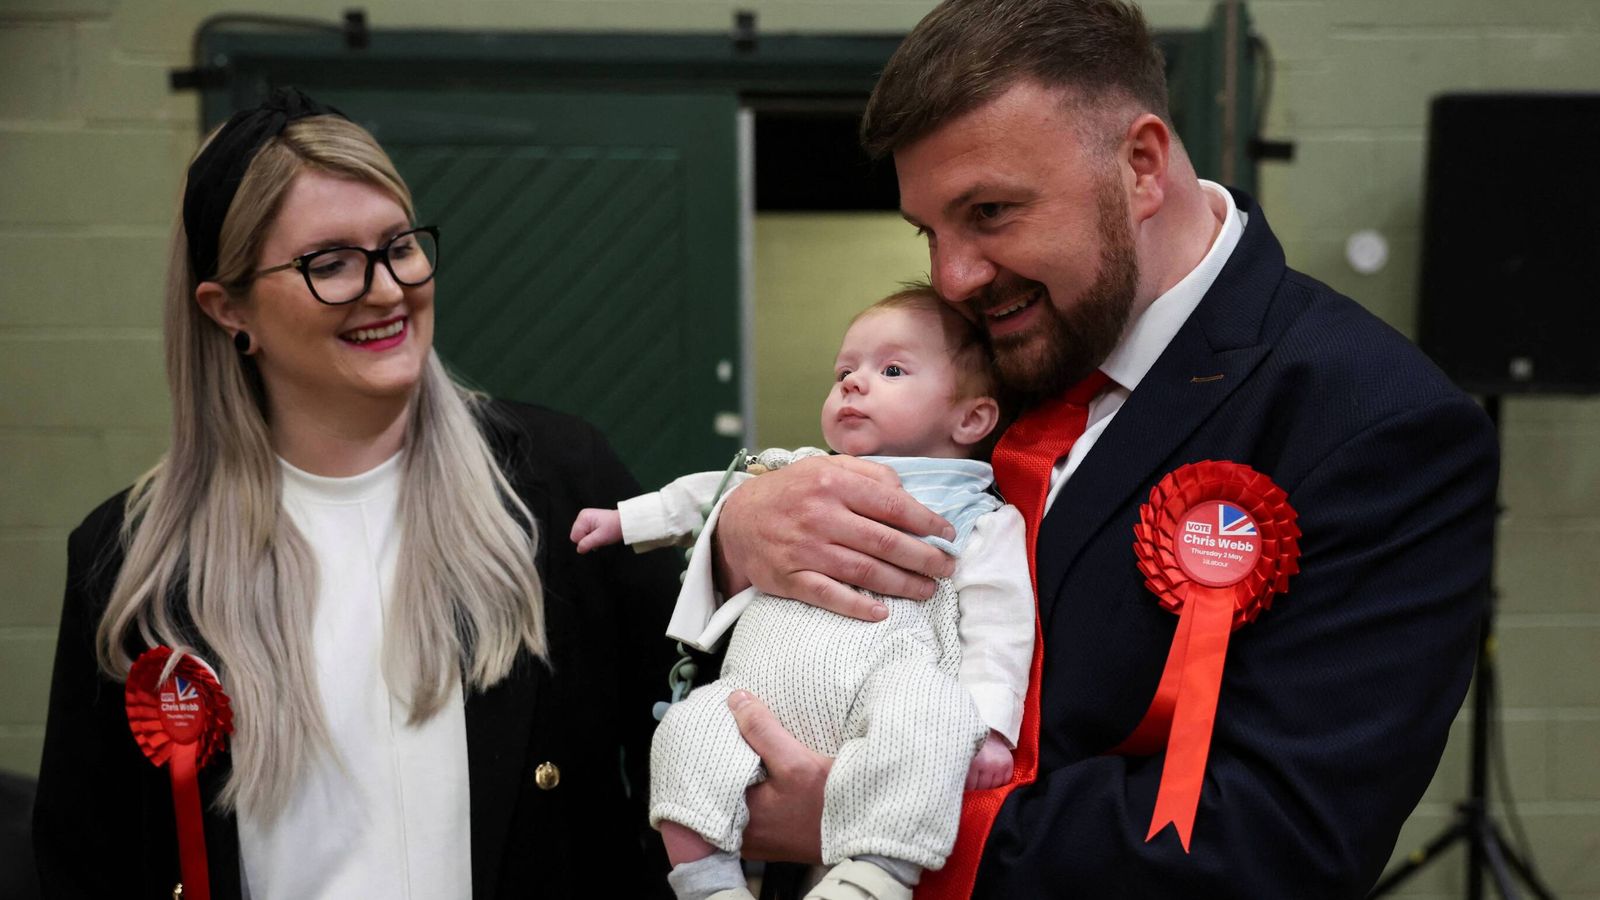 Blackpool South by-election: Sir Keir Starmer hails 'seismic win' as Labour takes seat from Conservatives